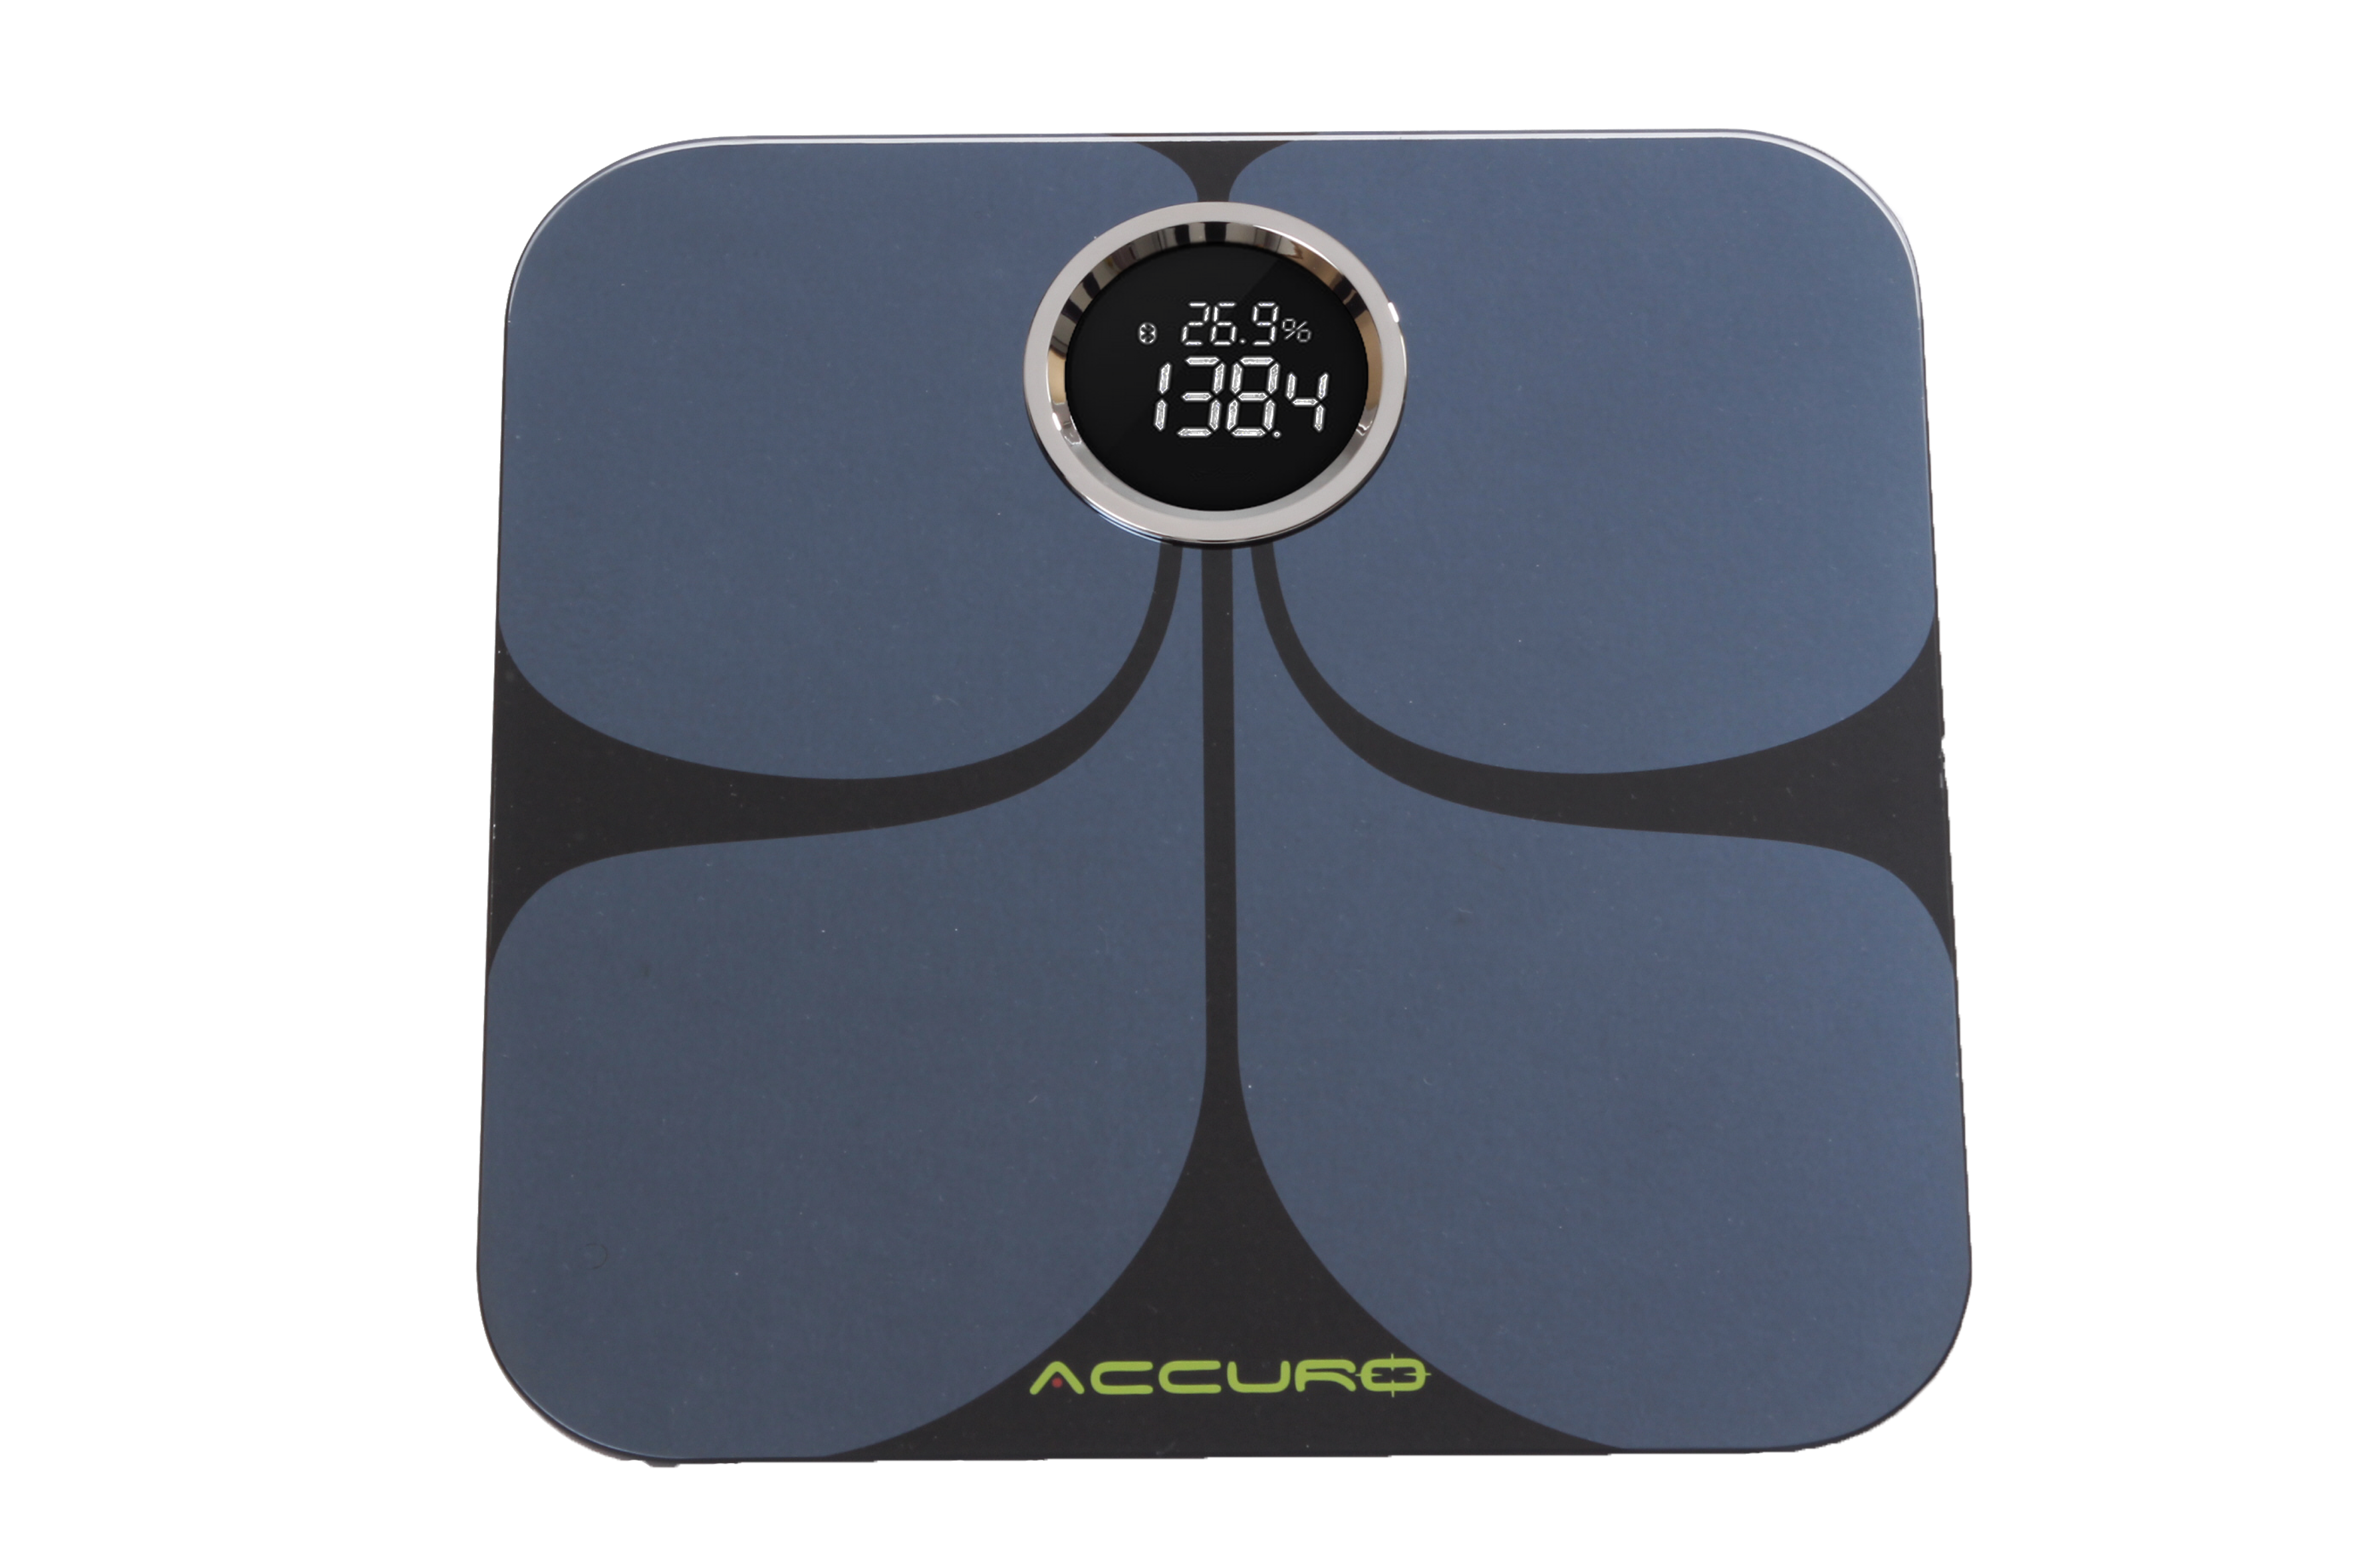 https://www.accurofit.com/wp-content/uploads/2016/01/At-Home-Body-Fat-Scale.png